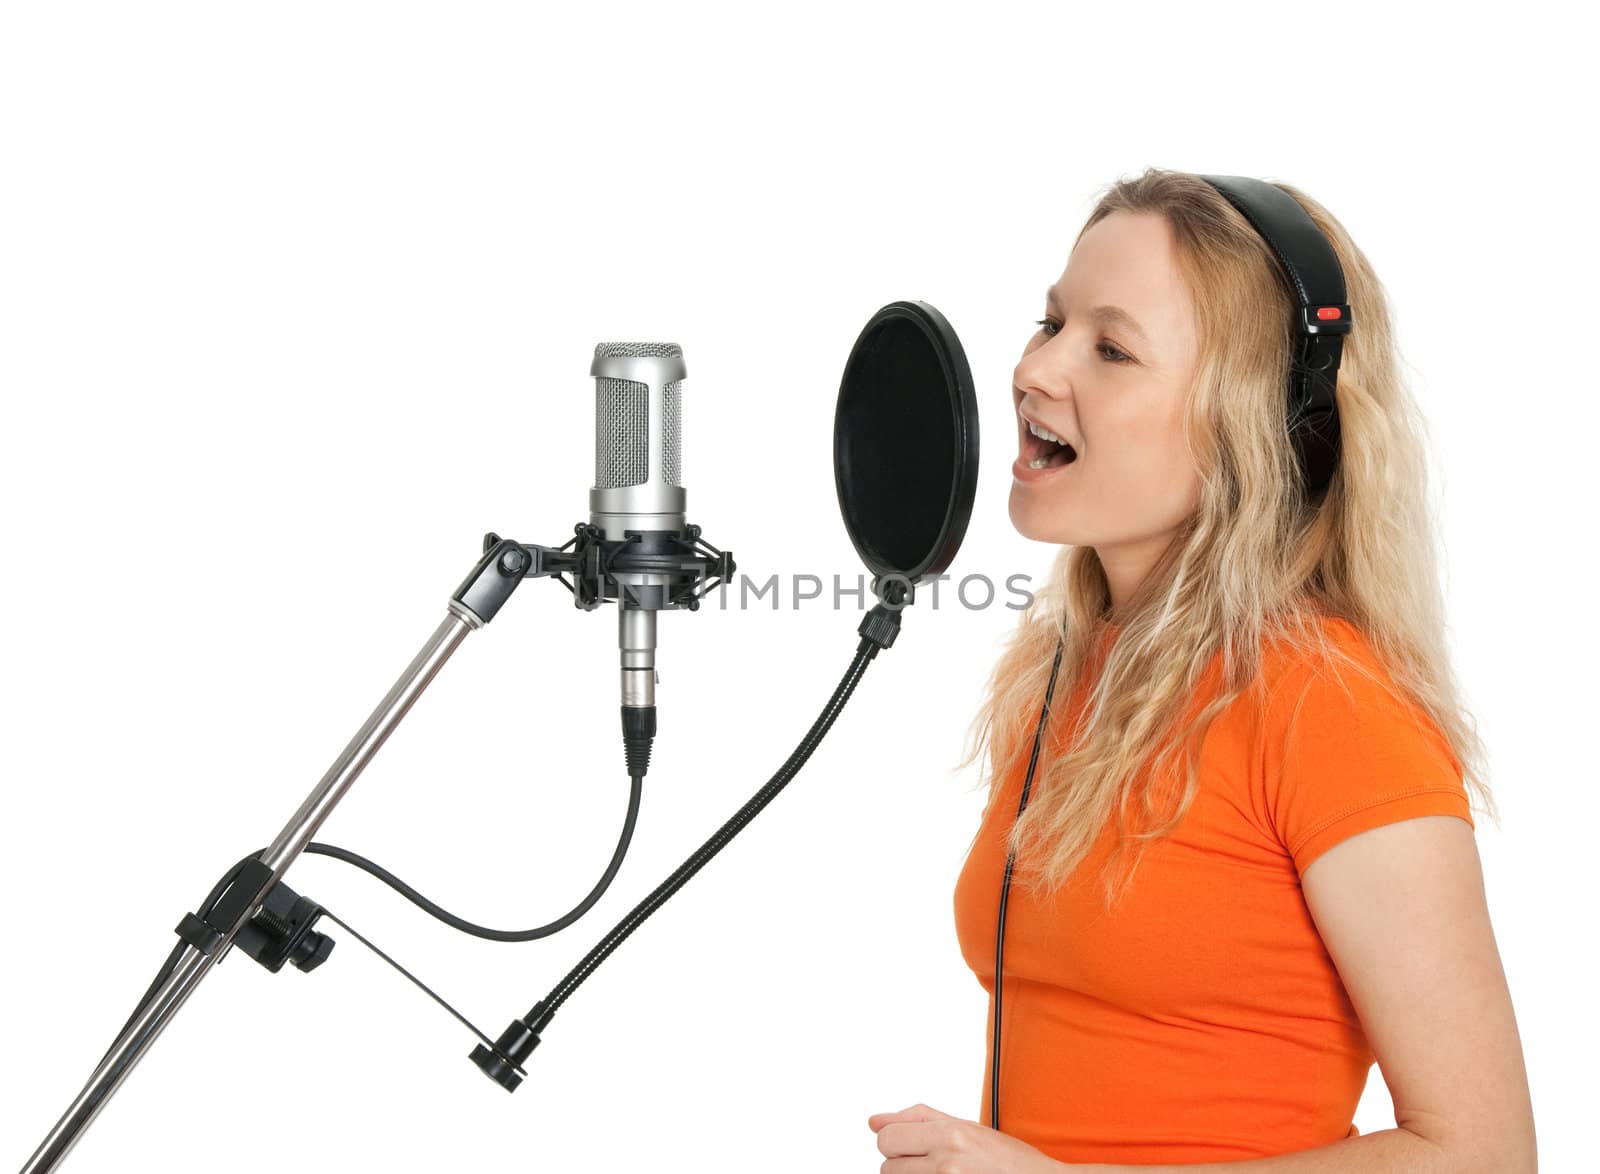 Female singer in orange t-shirt singing with studio microphone. Isolated on white background.